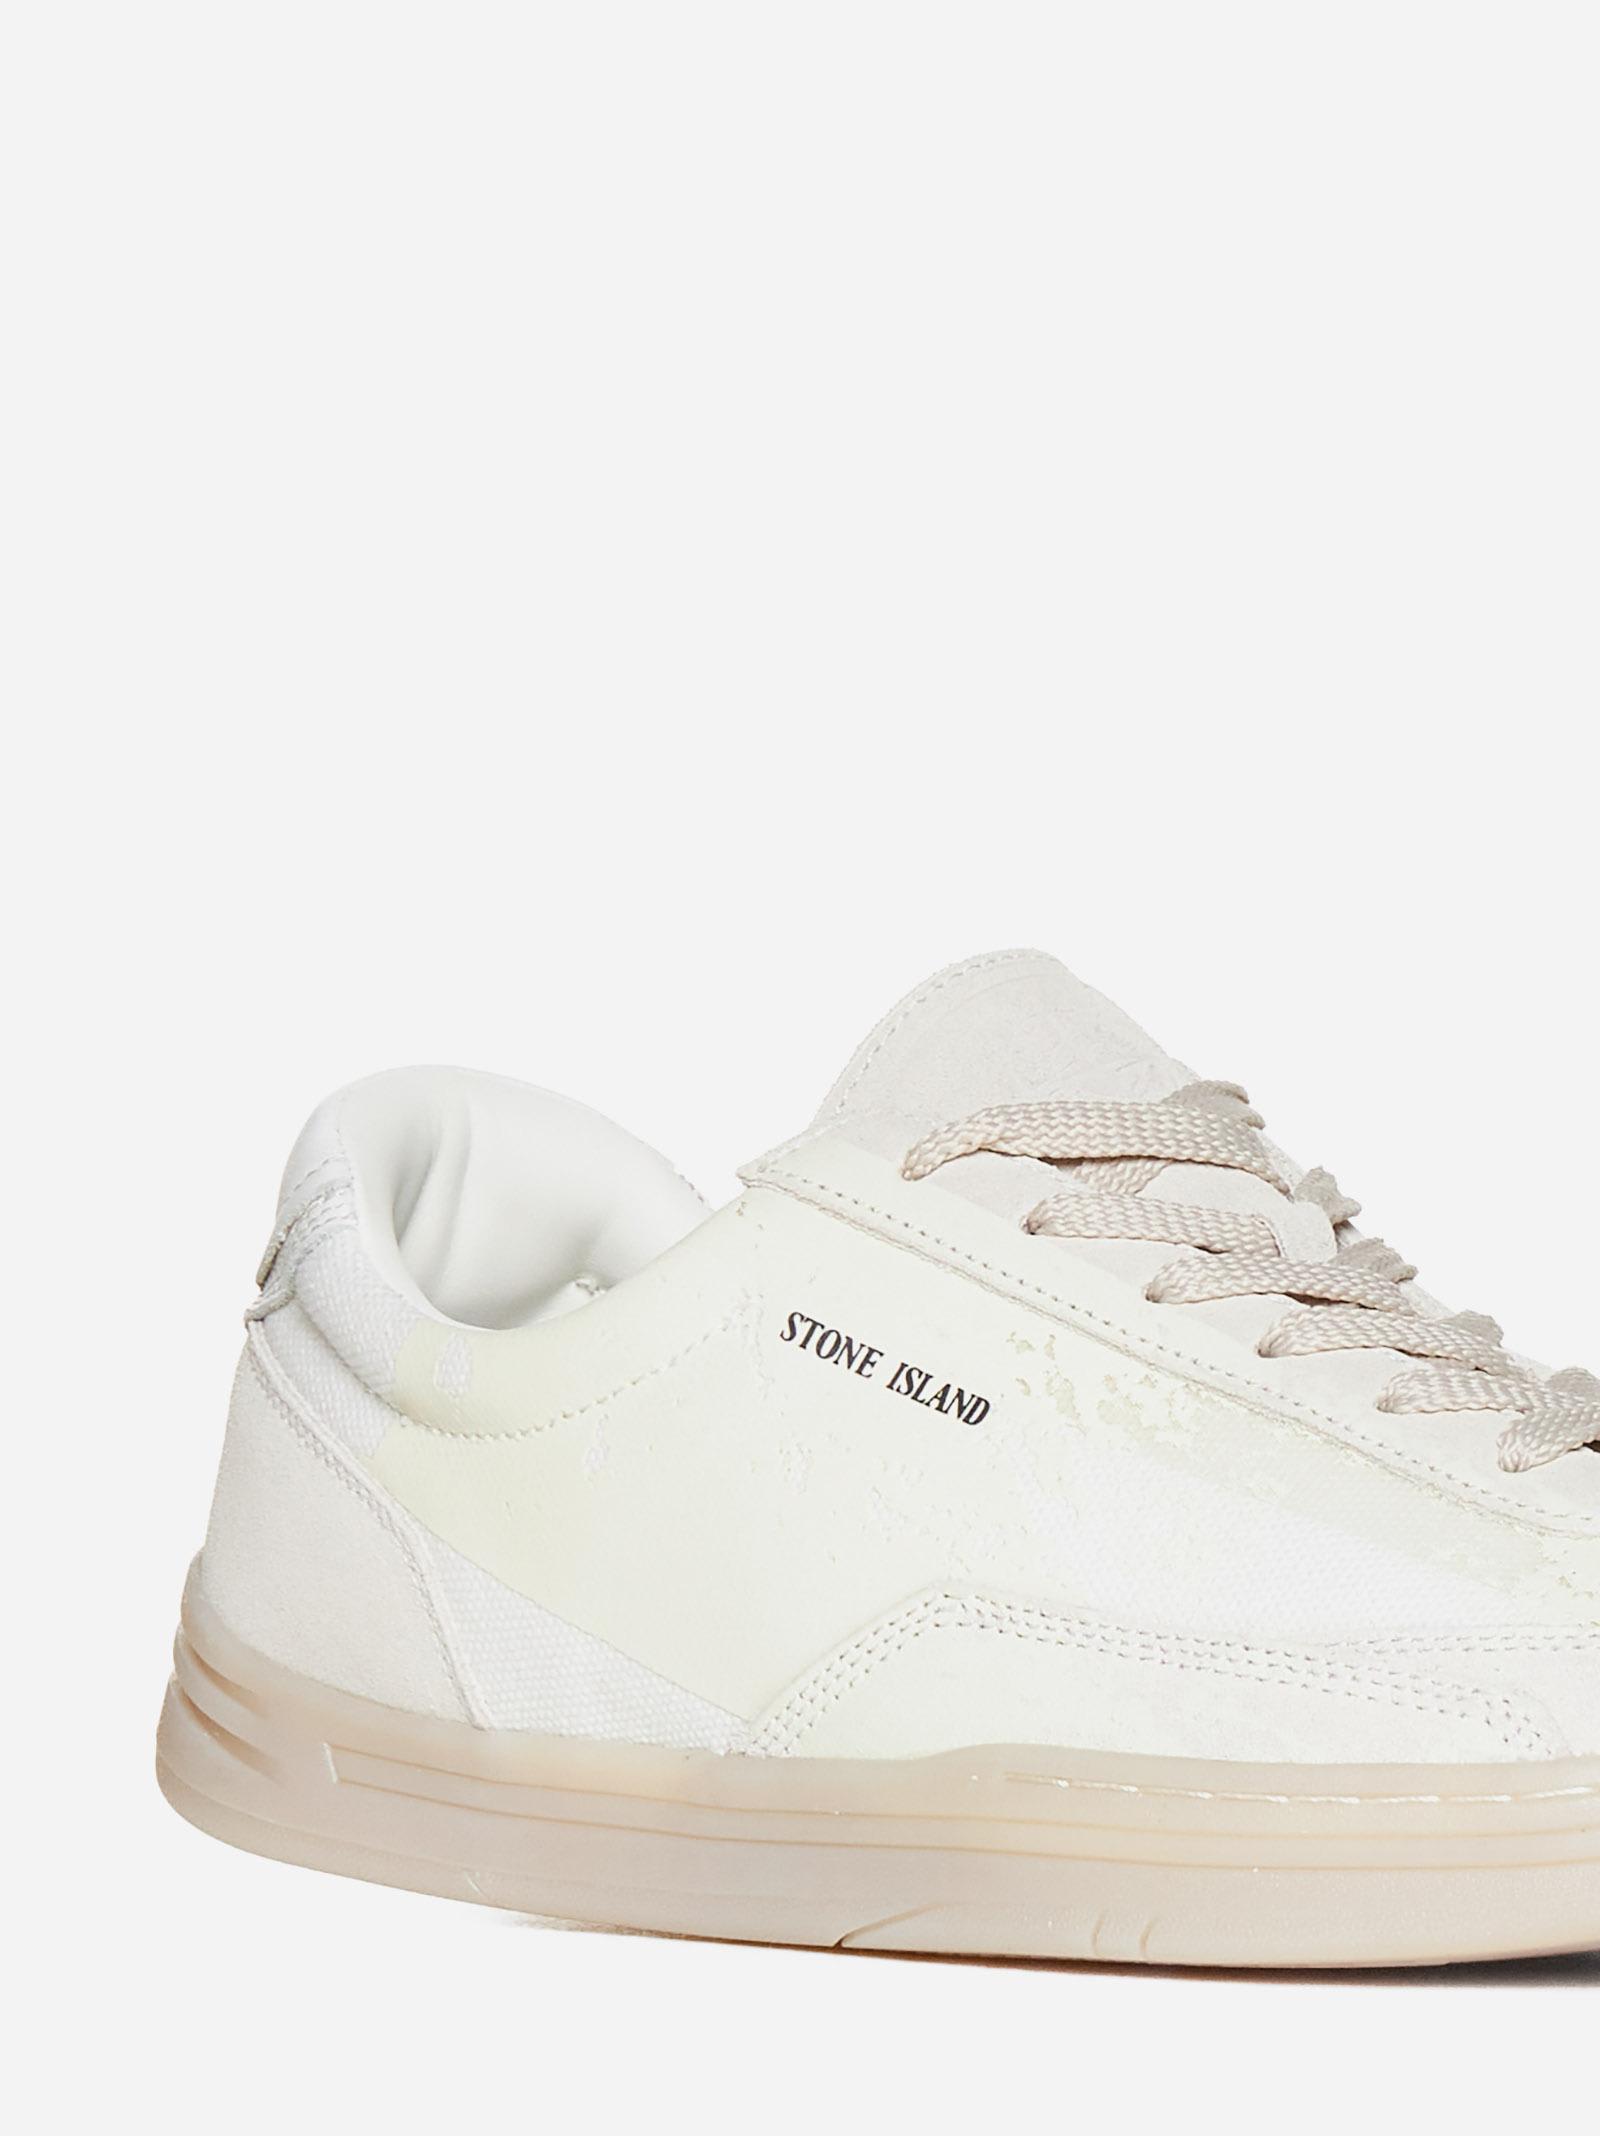 Stone Island - Low Top Sneakers | HBX - Globally Curated Fashion and  Lifestyle by Hypebeast